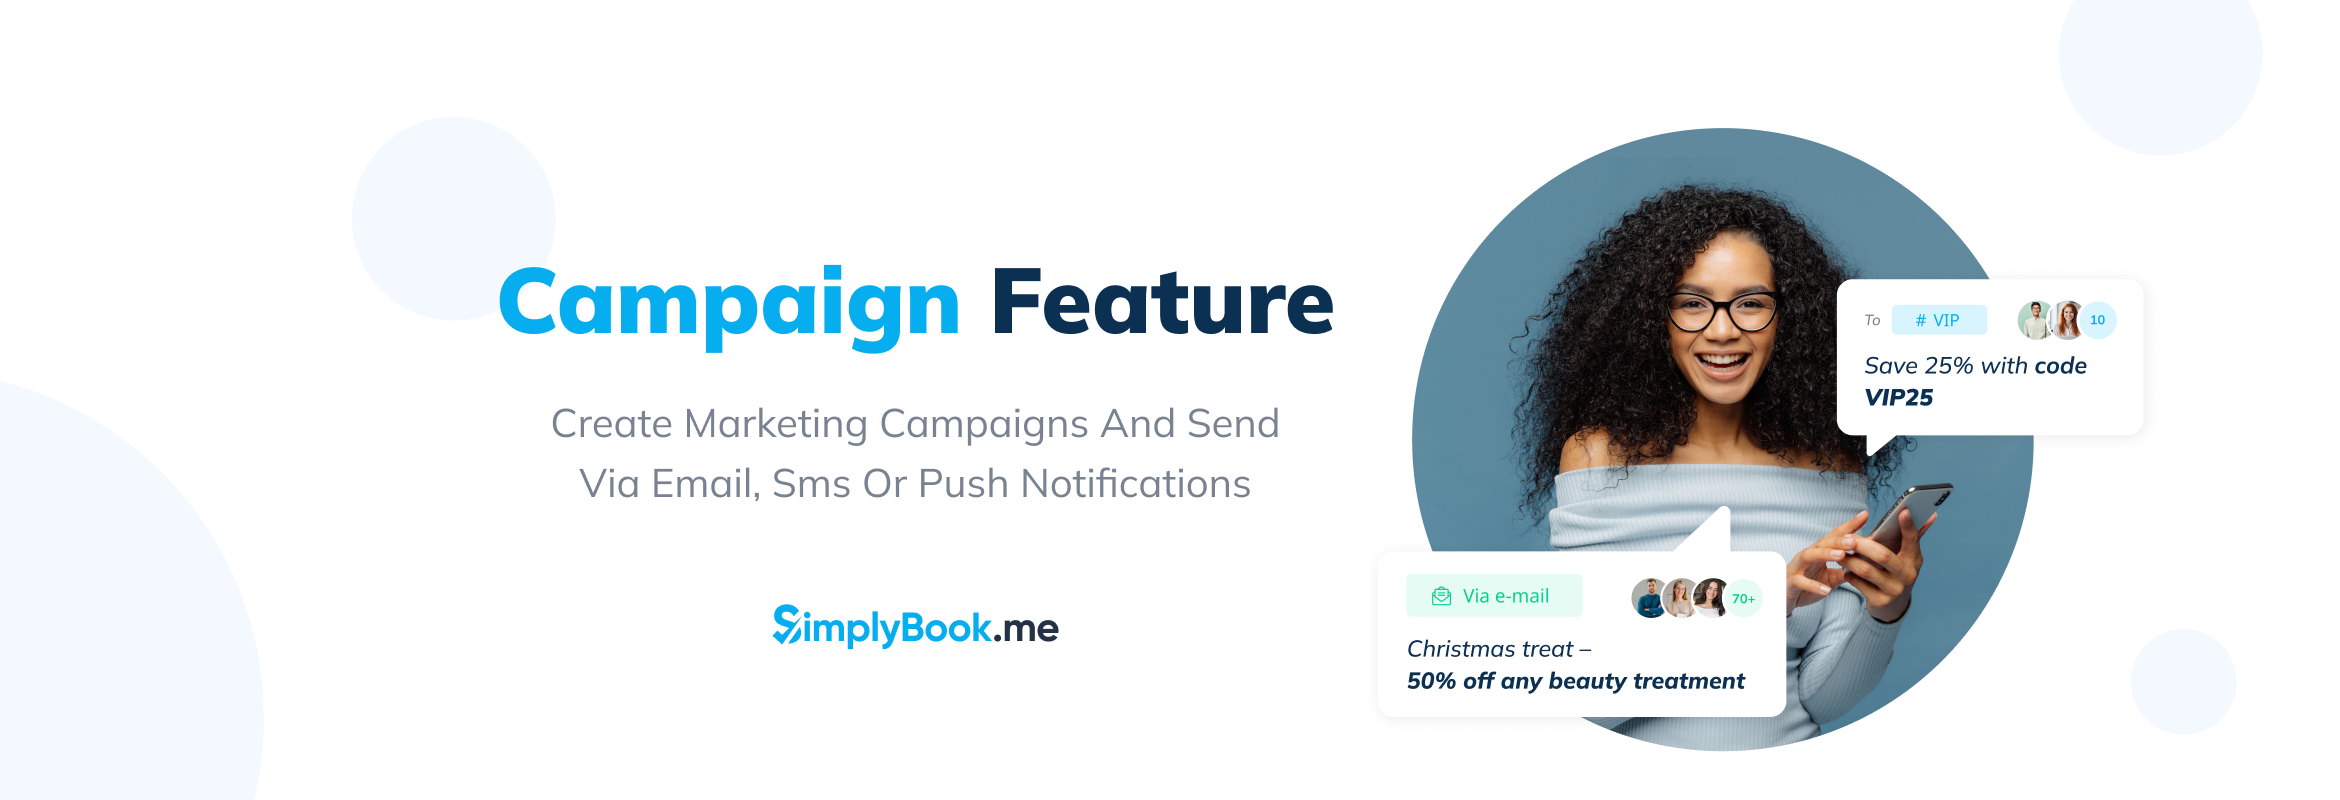 Campaign Feature